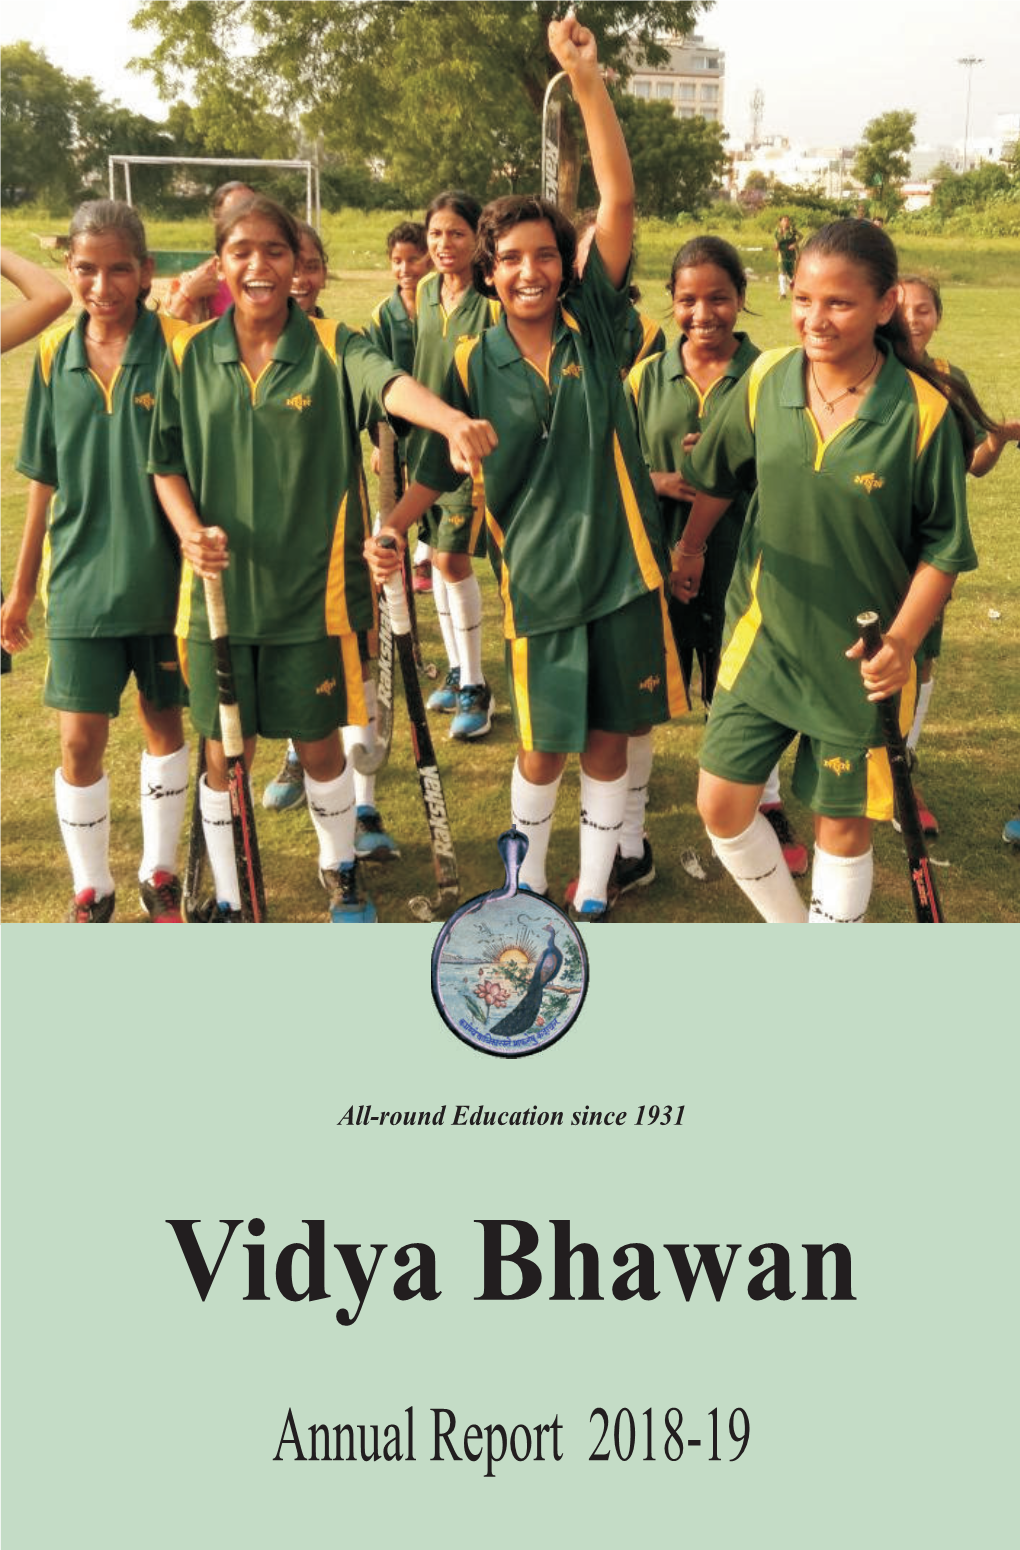 Annual Report 2018-19 Aims and Objects of Vidya Bhawan